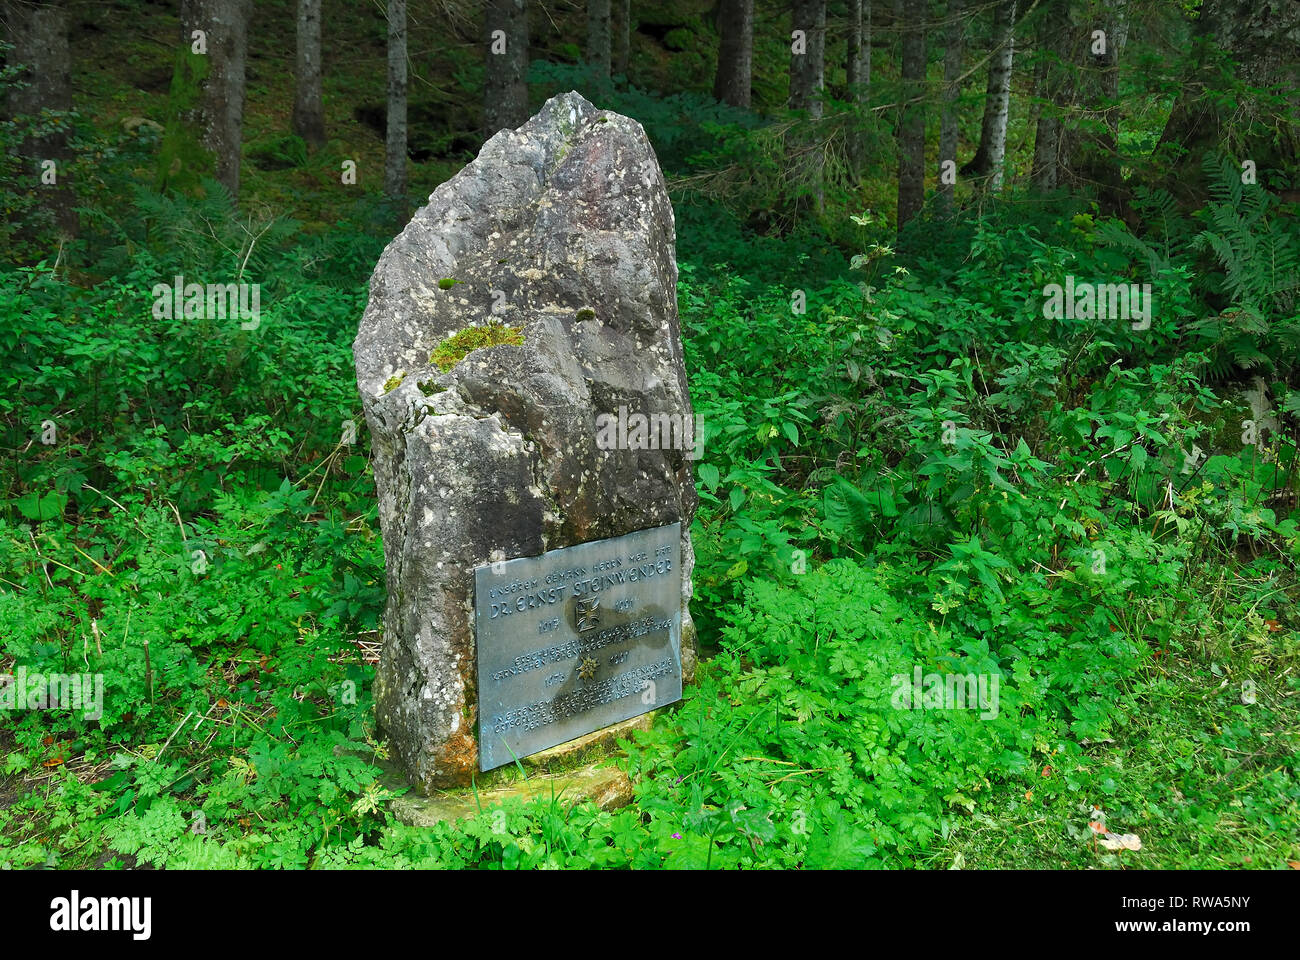 Austria, Plockenpass, Mauthen village. Plate in memory of the mountain rescue doctor Ernst Steinwender who since 1970 contributed to the restoration of the Alpine paths of the Carnic Alps. Sentiero della Pace (English : Path of Peace) Stock Photo